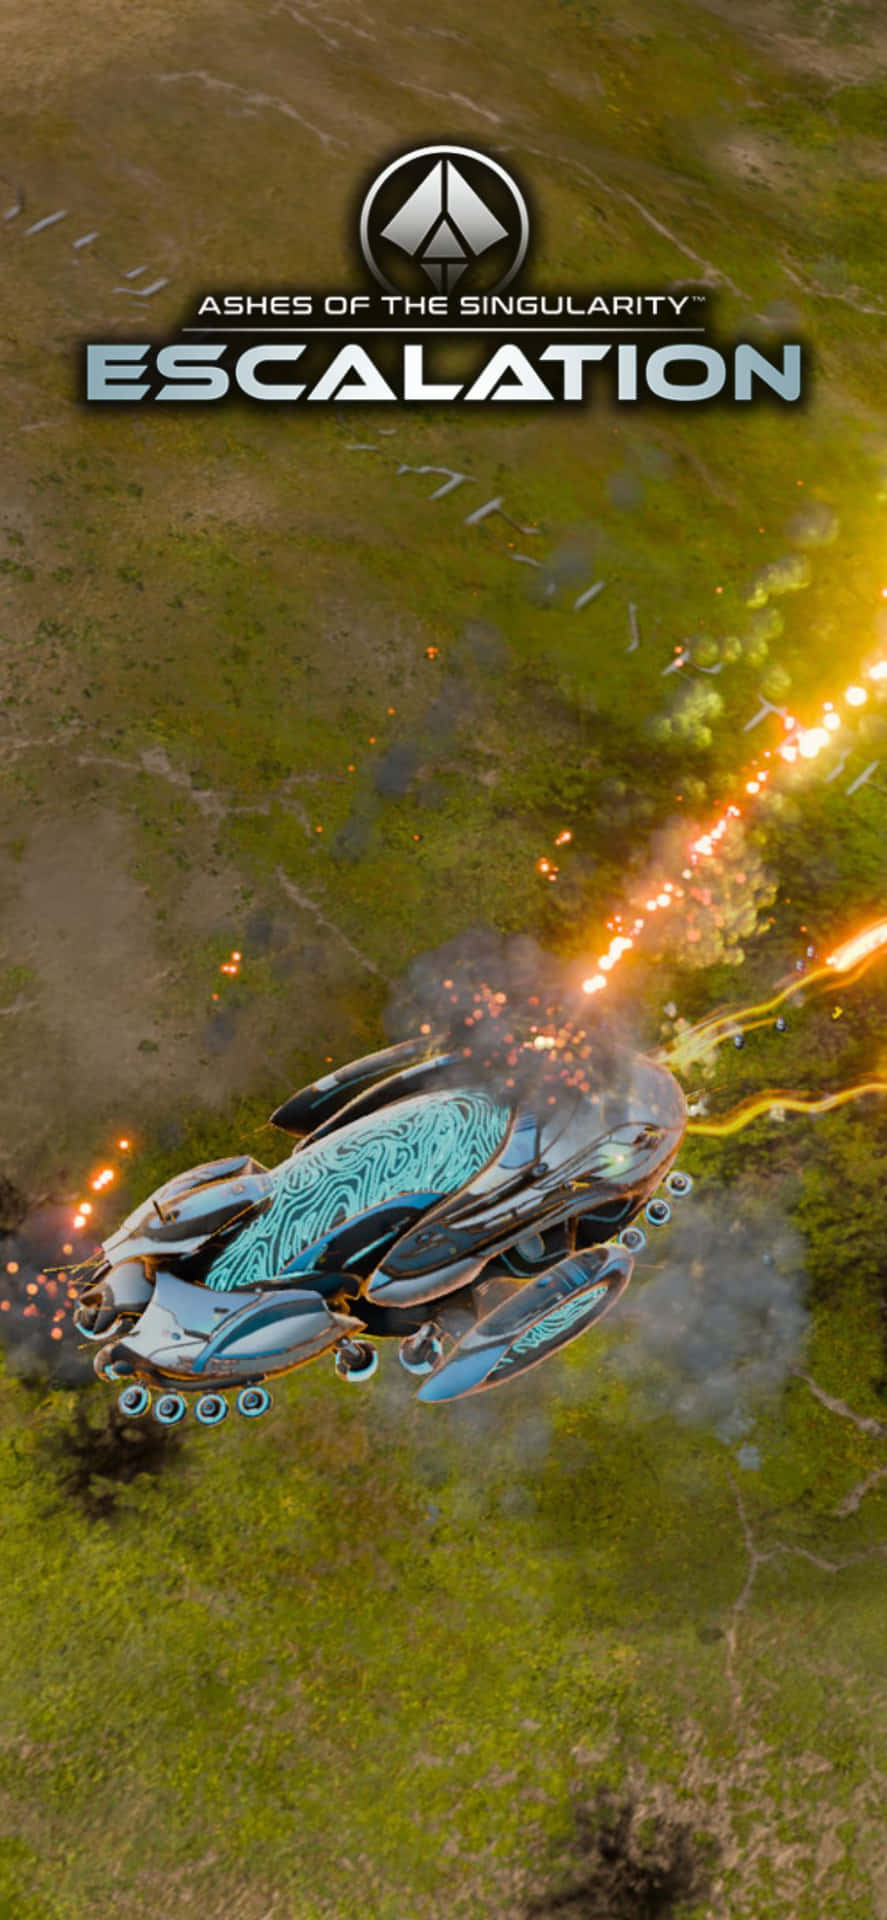 Conquer epic strategy-filled battlefields with Iphone X and Ashes of the Singularity Escalation